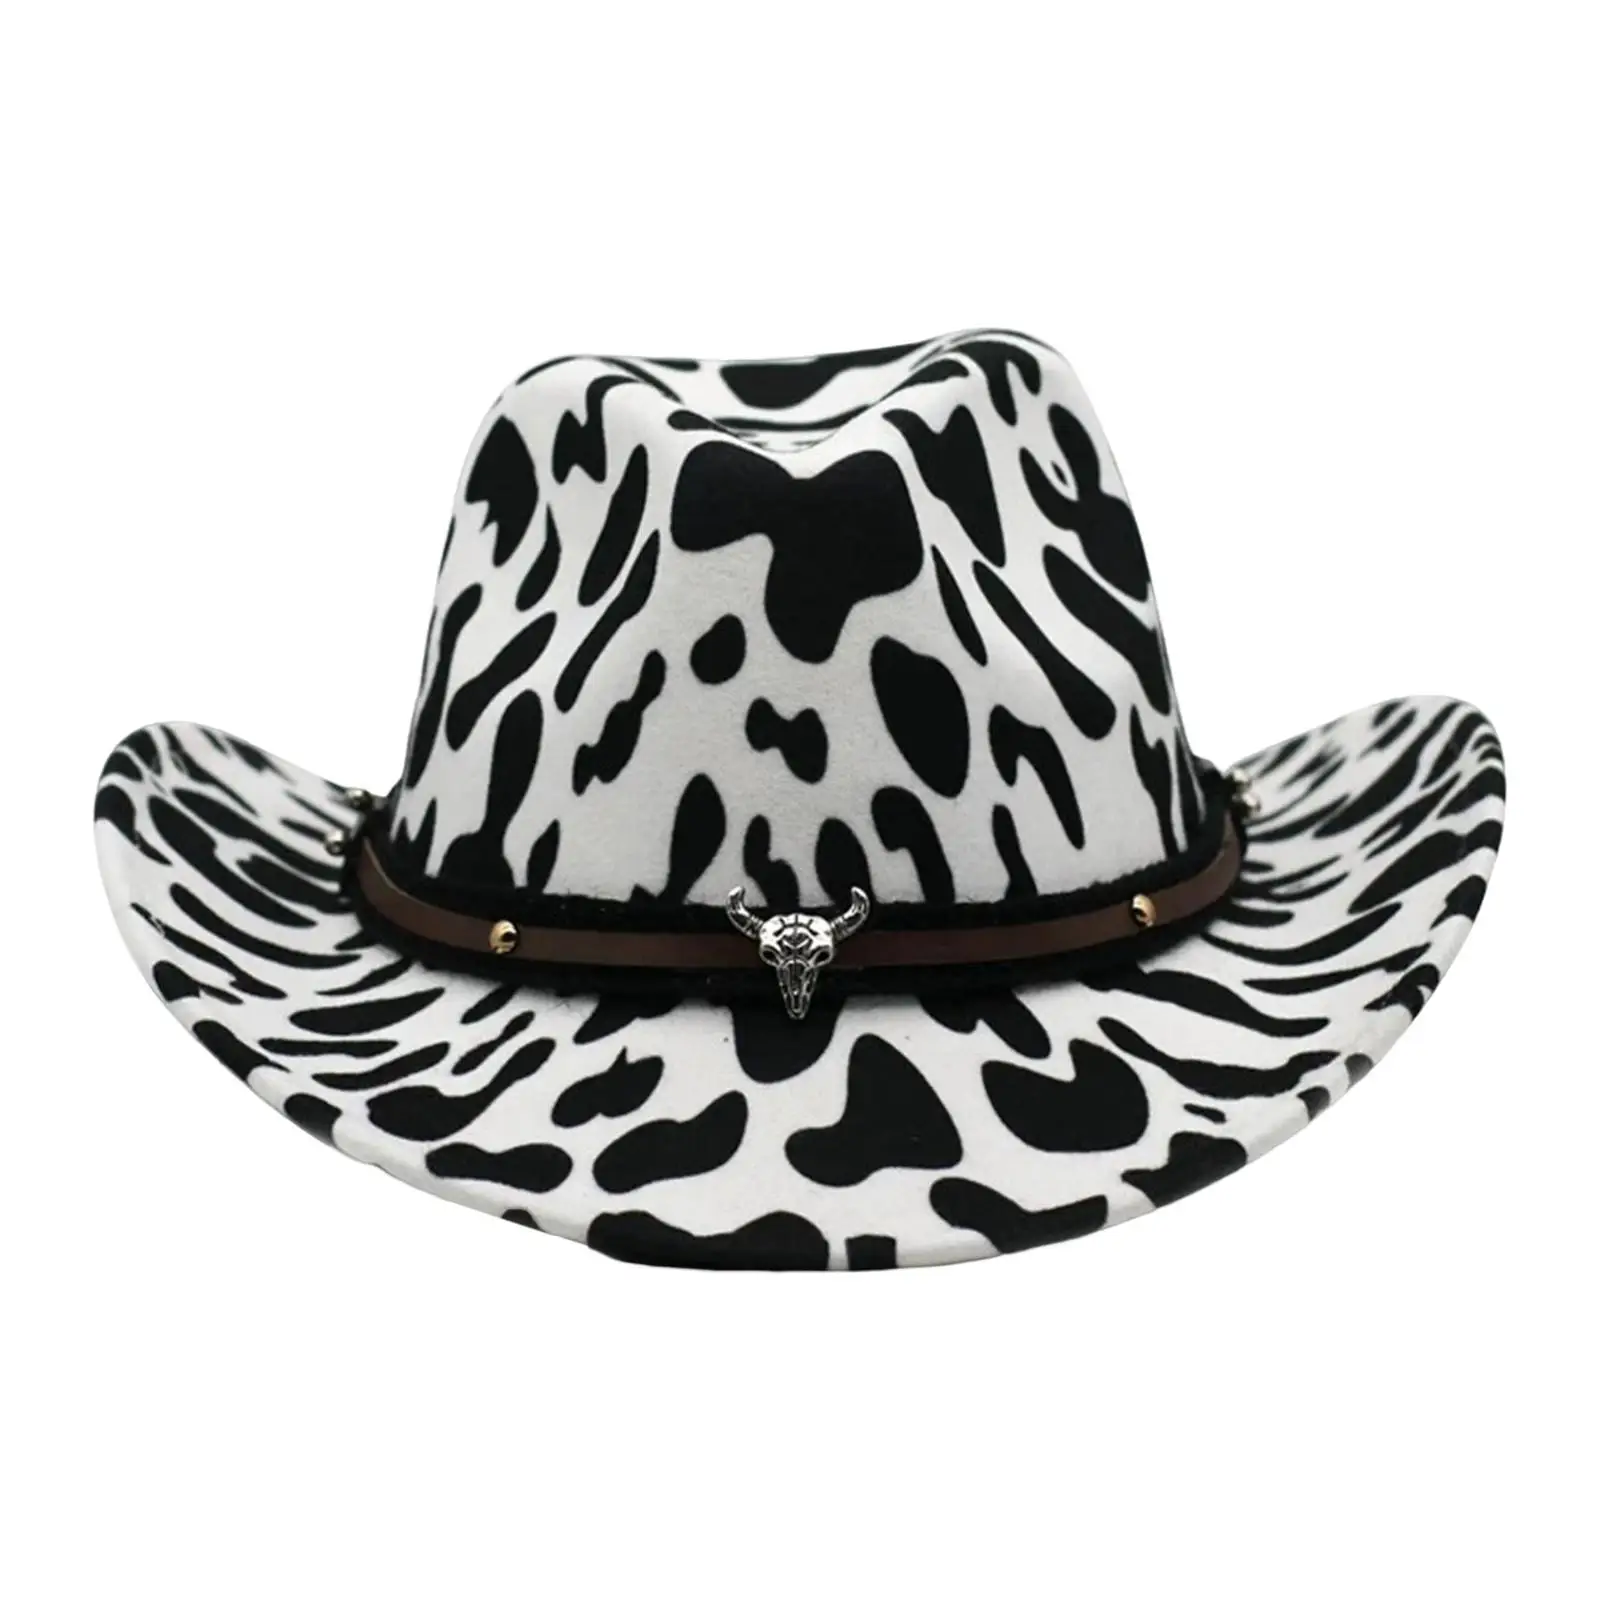 Fashion Western Cowboy Hat Adults Sun Hat Fancy Dress Wide Brim for Costume Celebration Holiday Party Favors Beach